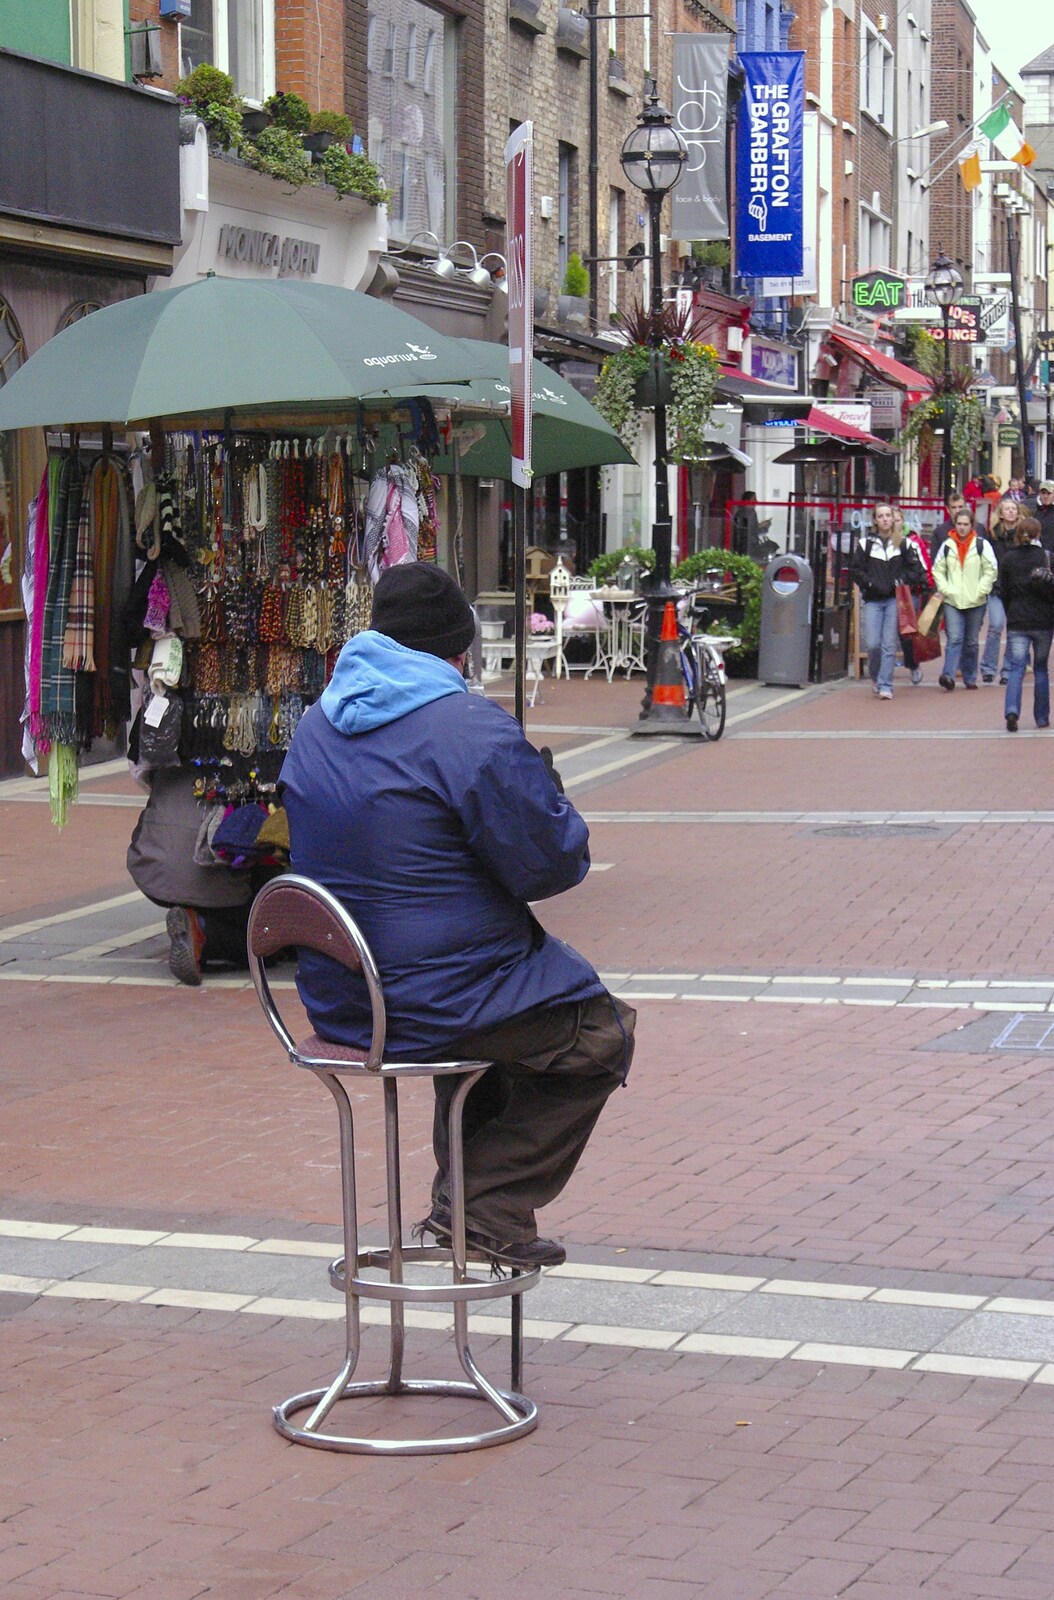 A dude on a stool from Easter in Dublin, Ireland - 21st March 2008